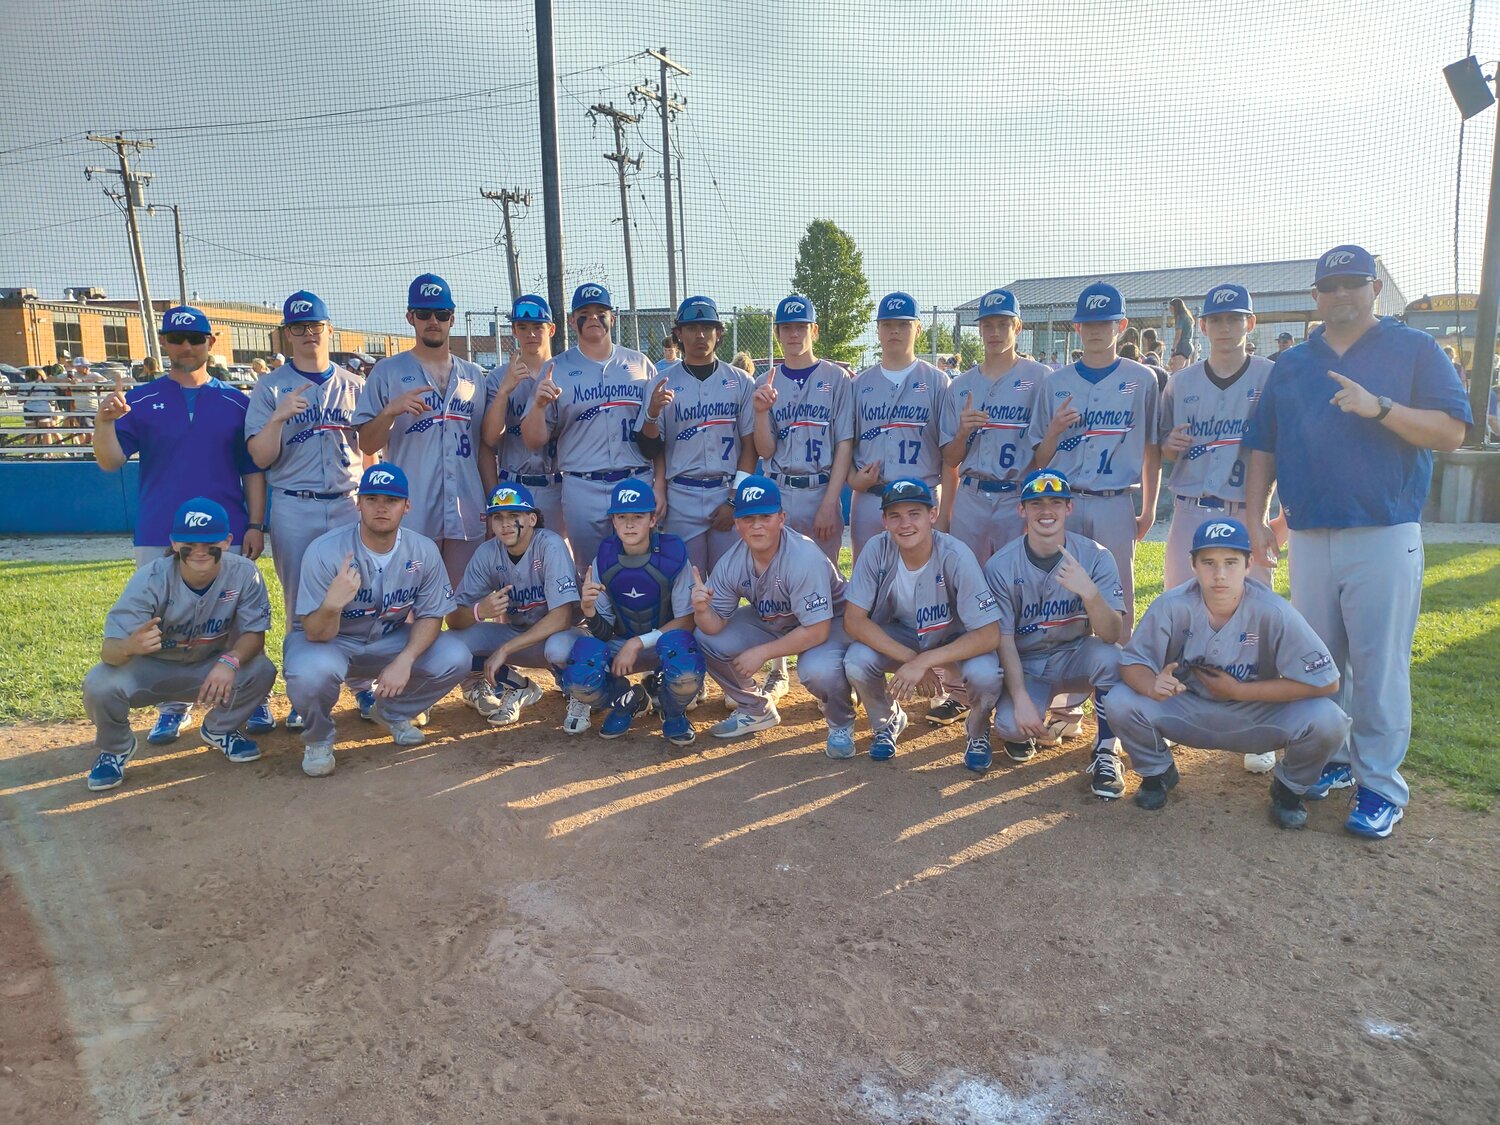 The Montgomery County Wildcats pose at home plate after beating North Callaway 7-0 on May 8 that clinched them a share of the Eastern Missouri Conference title with Elsberry.